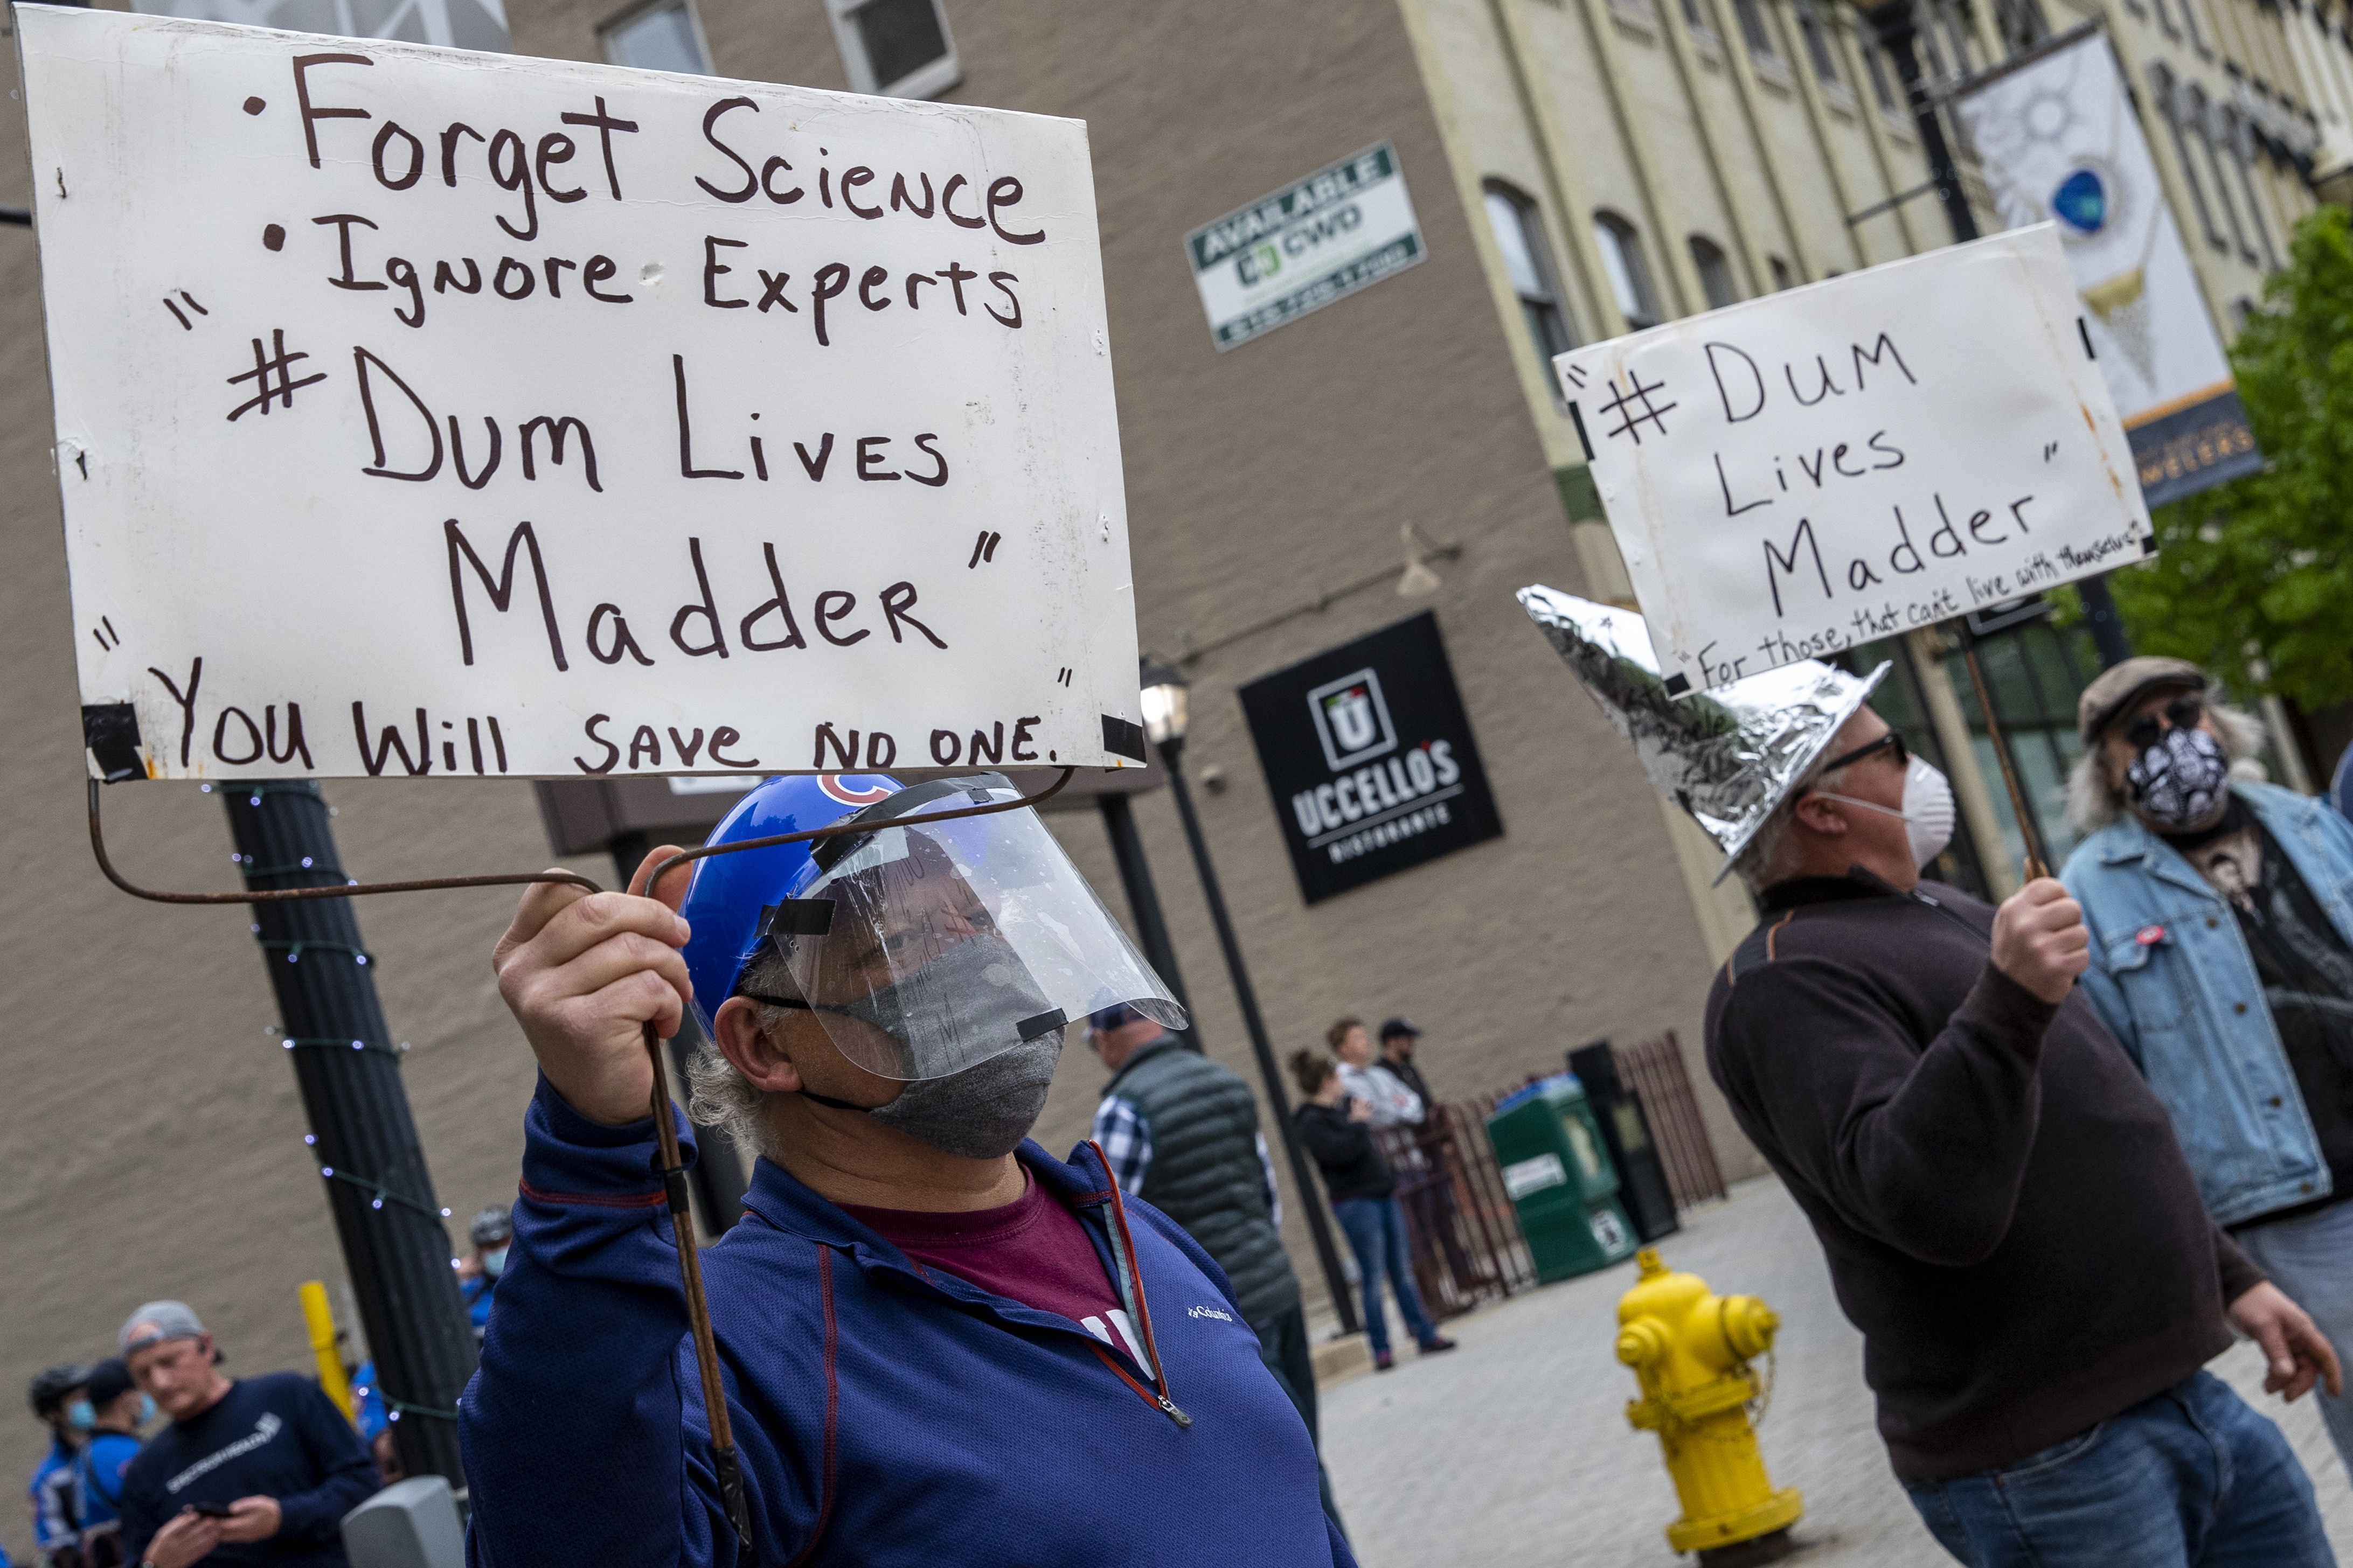 Mike Harris, left, of Ada, protests against the protesters at the "American Patriot Rally-Sheriffs speak out" event at Rosa Parks Circle in downtown Grand Rapids on Monday, May 18, 2020. The crowd is protesting against Gov. Gretchen Whitmer's stay-at-home order. (Cory Morse | MLive.com)